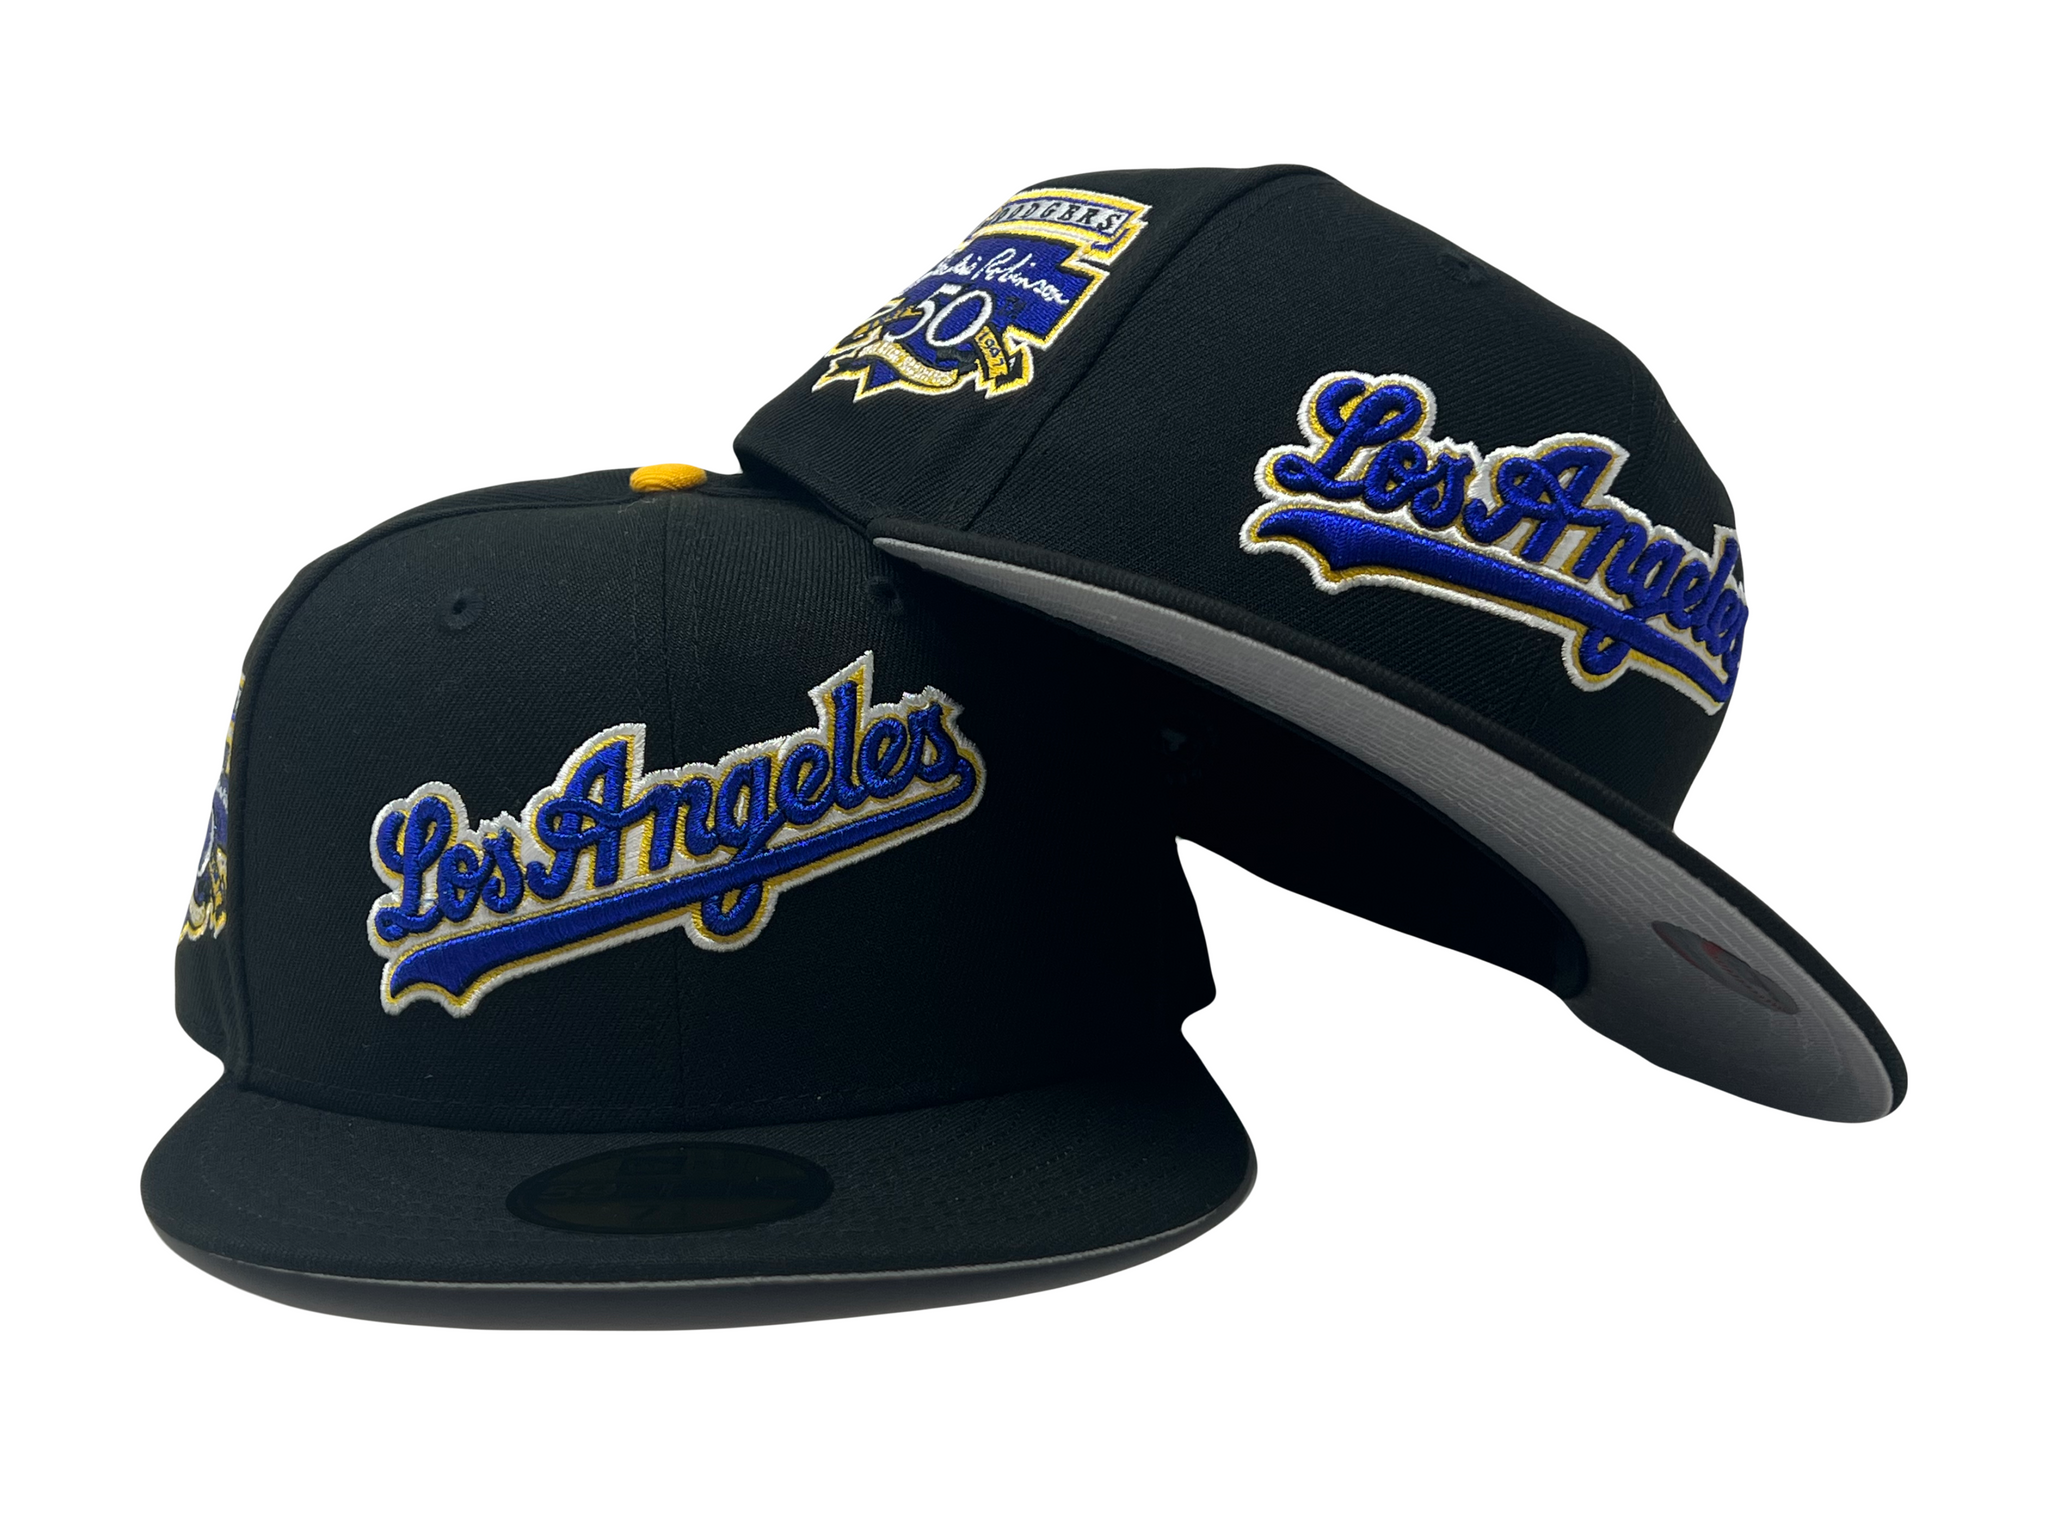 LOS ANGELES DODGERS JACKIE ROBINSON CROSSOVER COLLECTION NEW ERA FIT –  Sports World 165